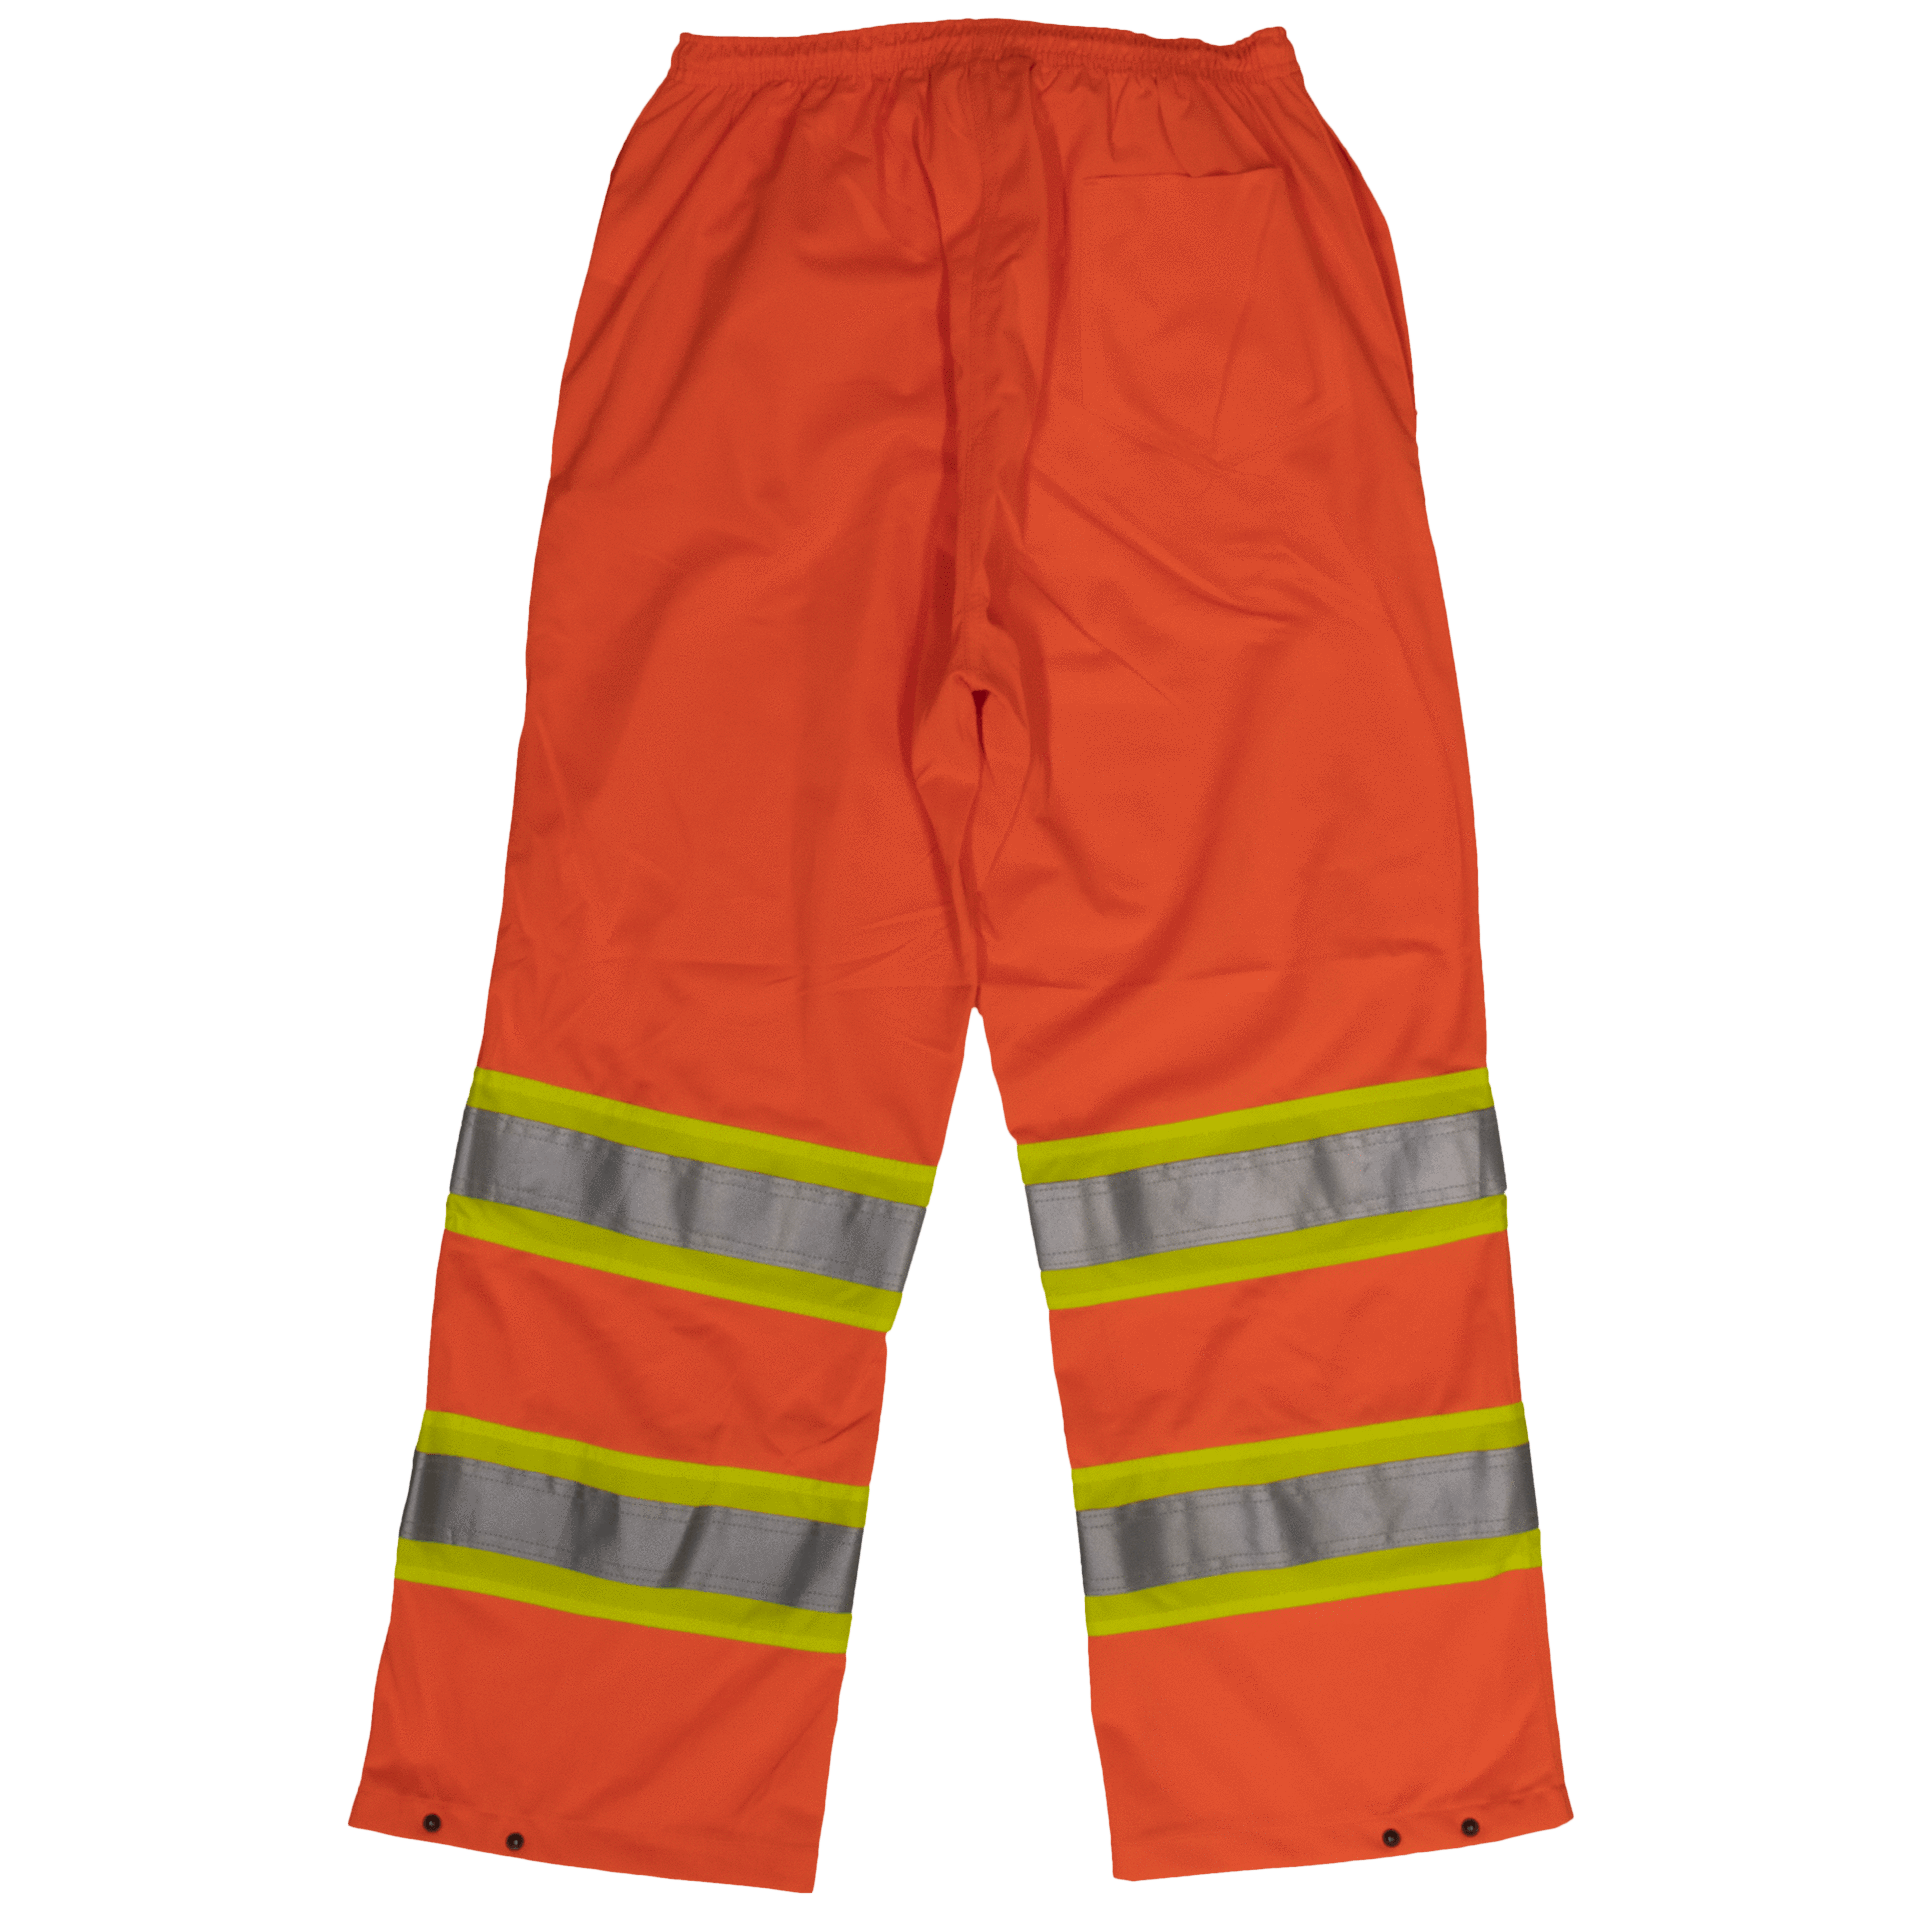 Tough Duck Safety Pull-On Pant - S603 - Fluorescent Orange - back